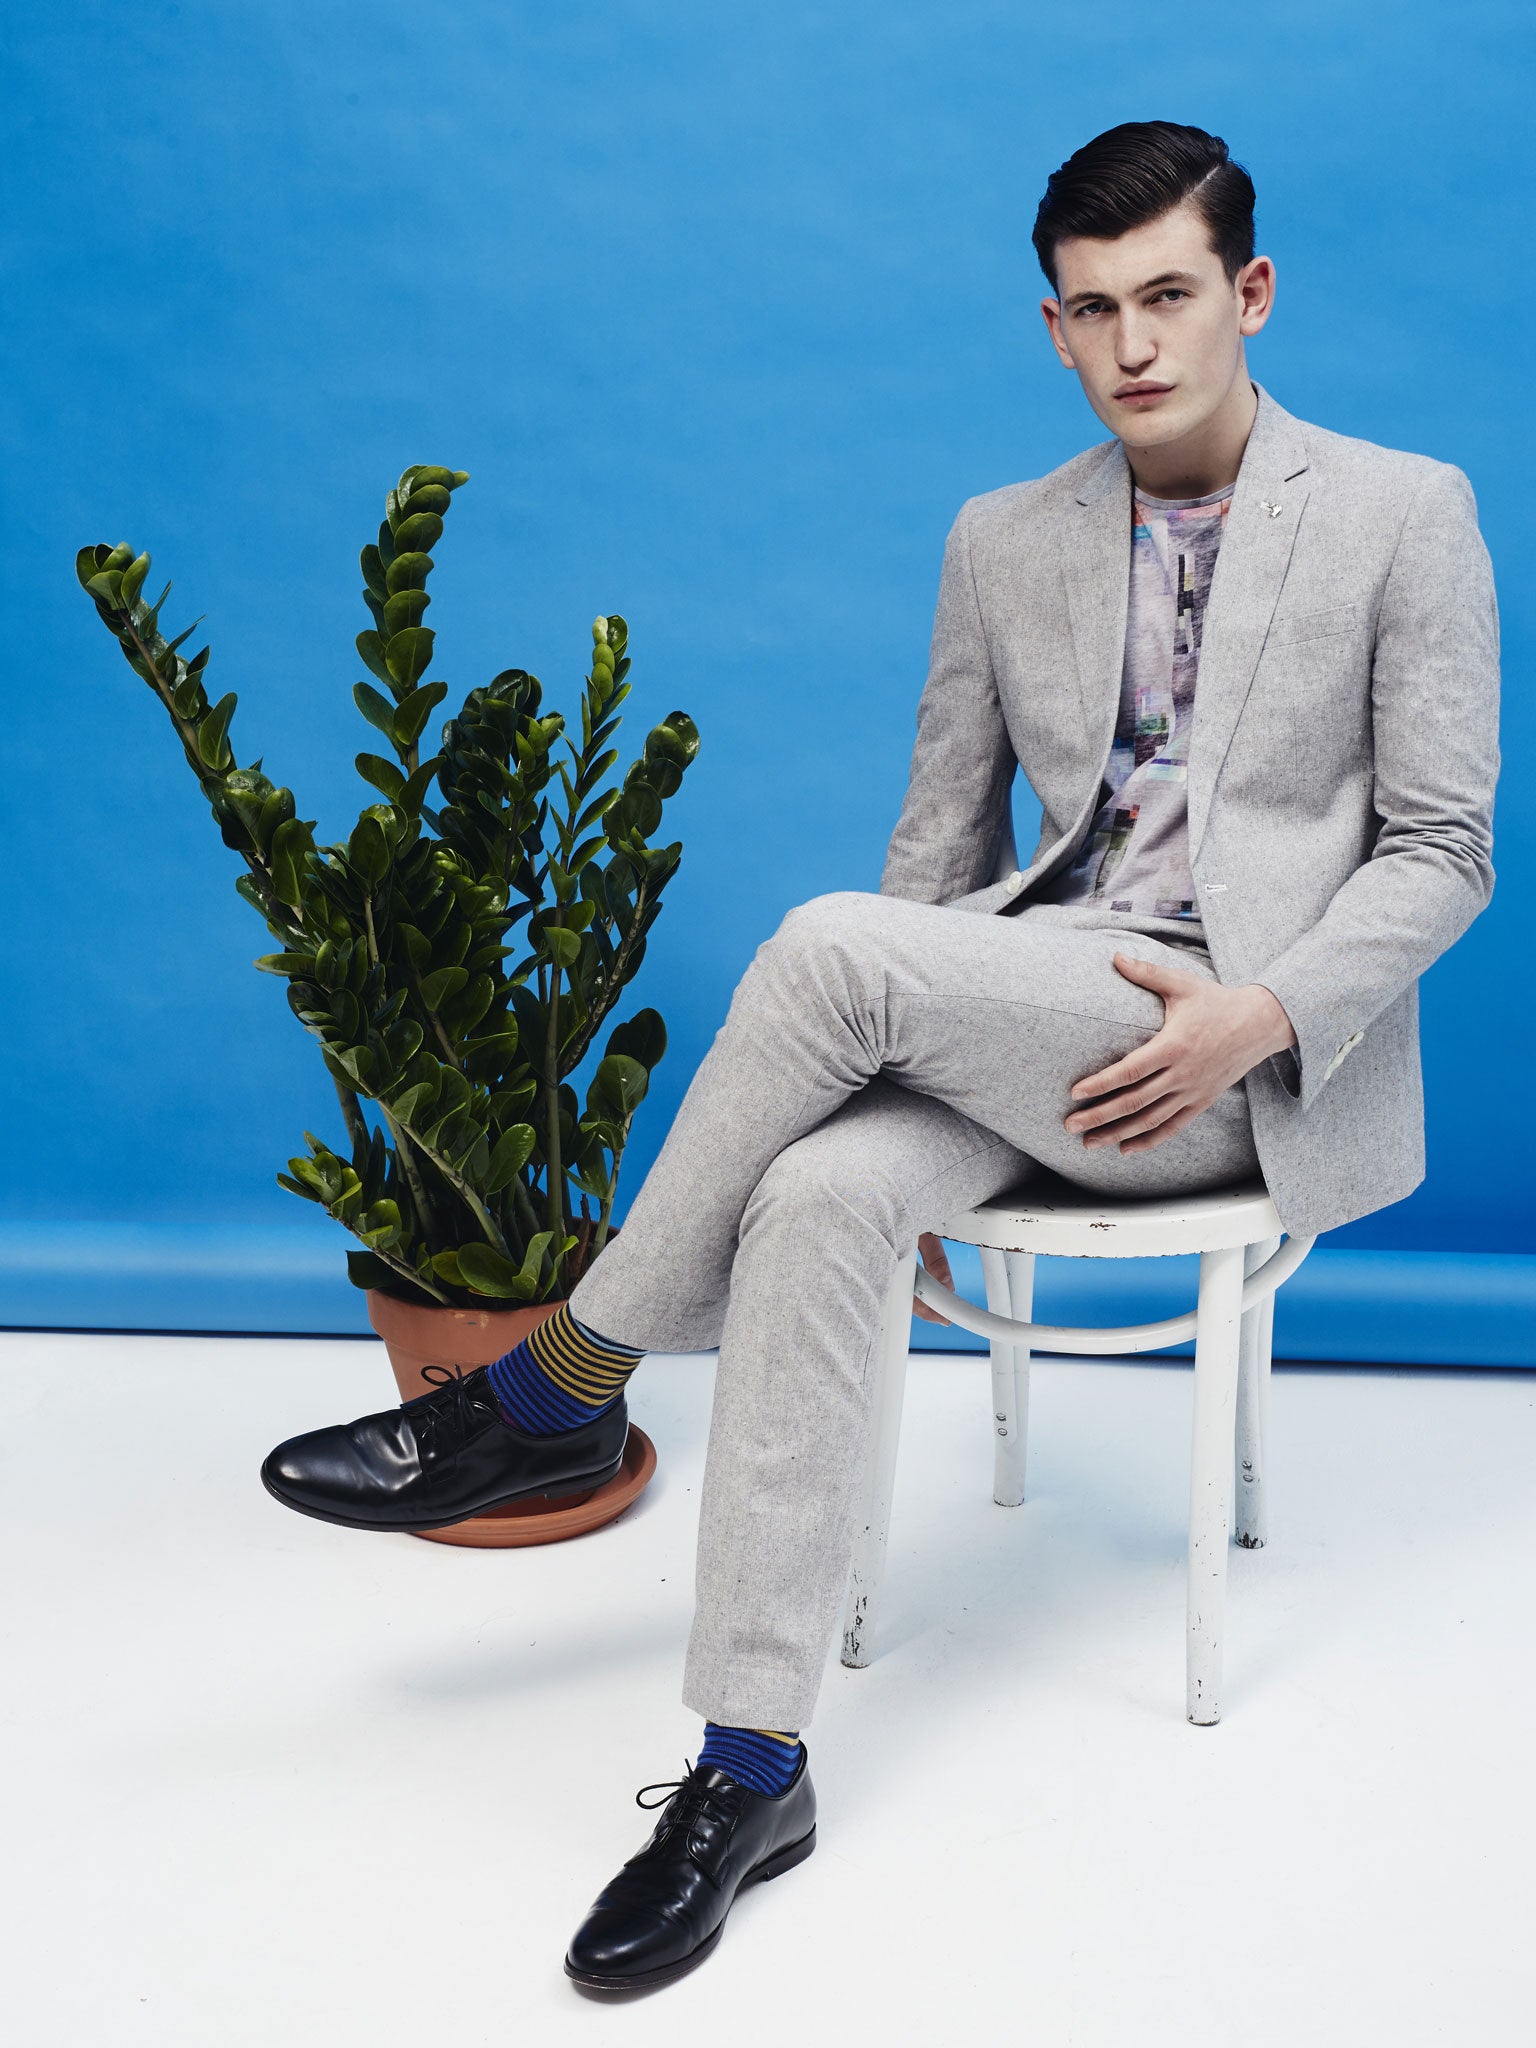 Suit £85, asos.com; T-shirt £109, PS by Paul Smith, and socks £16, Paul Smith, both paulsmith.co.uk; shoes £250, apc.fr